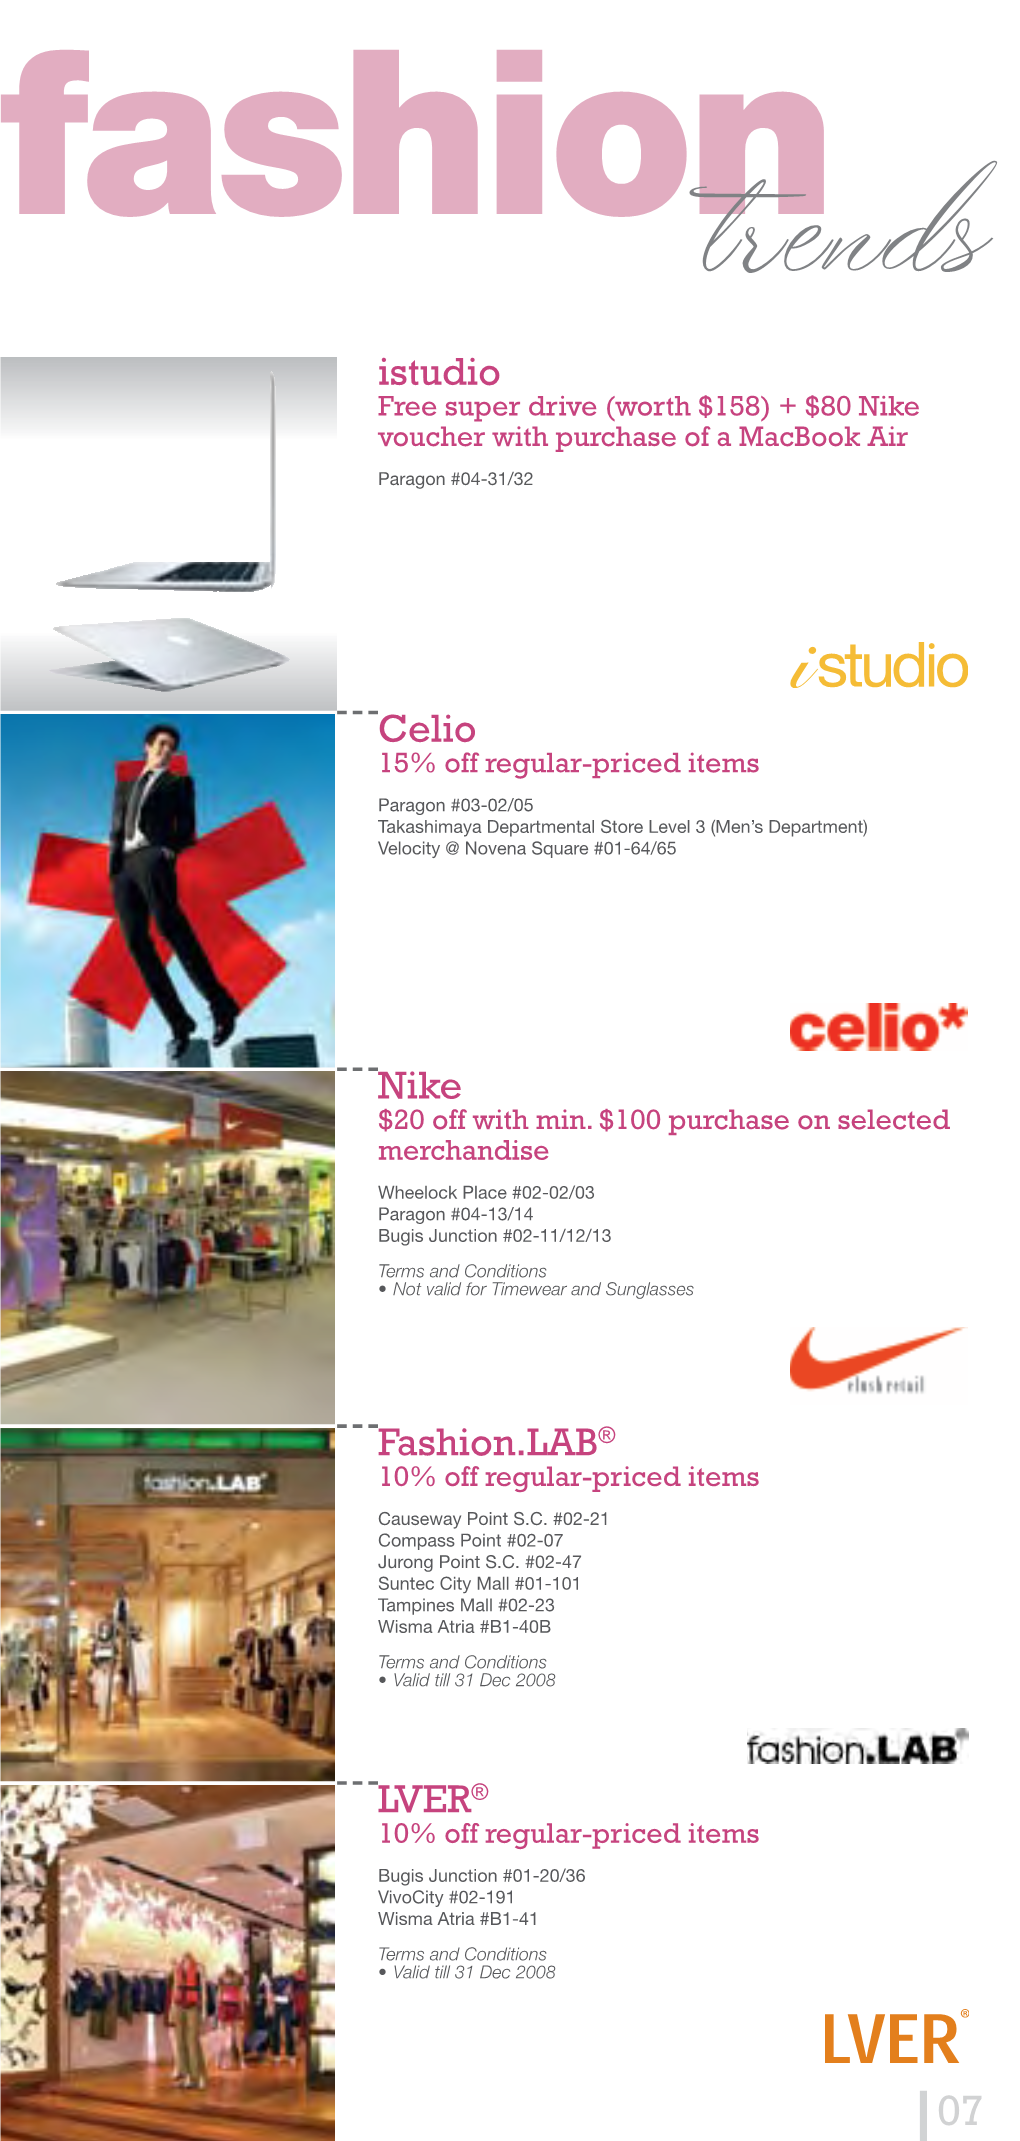 Fashiontrends Istudio Free Super Drive (Worth $158) + $80 Nike Voucher with Purchase of a Macbook Air Paragon #04-31/32